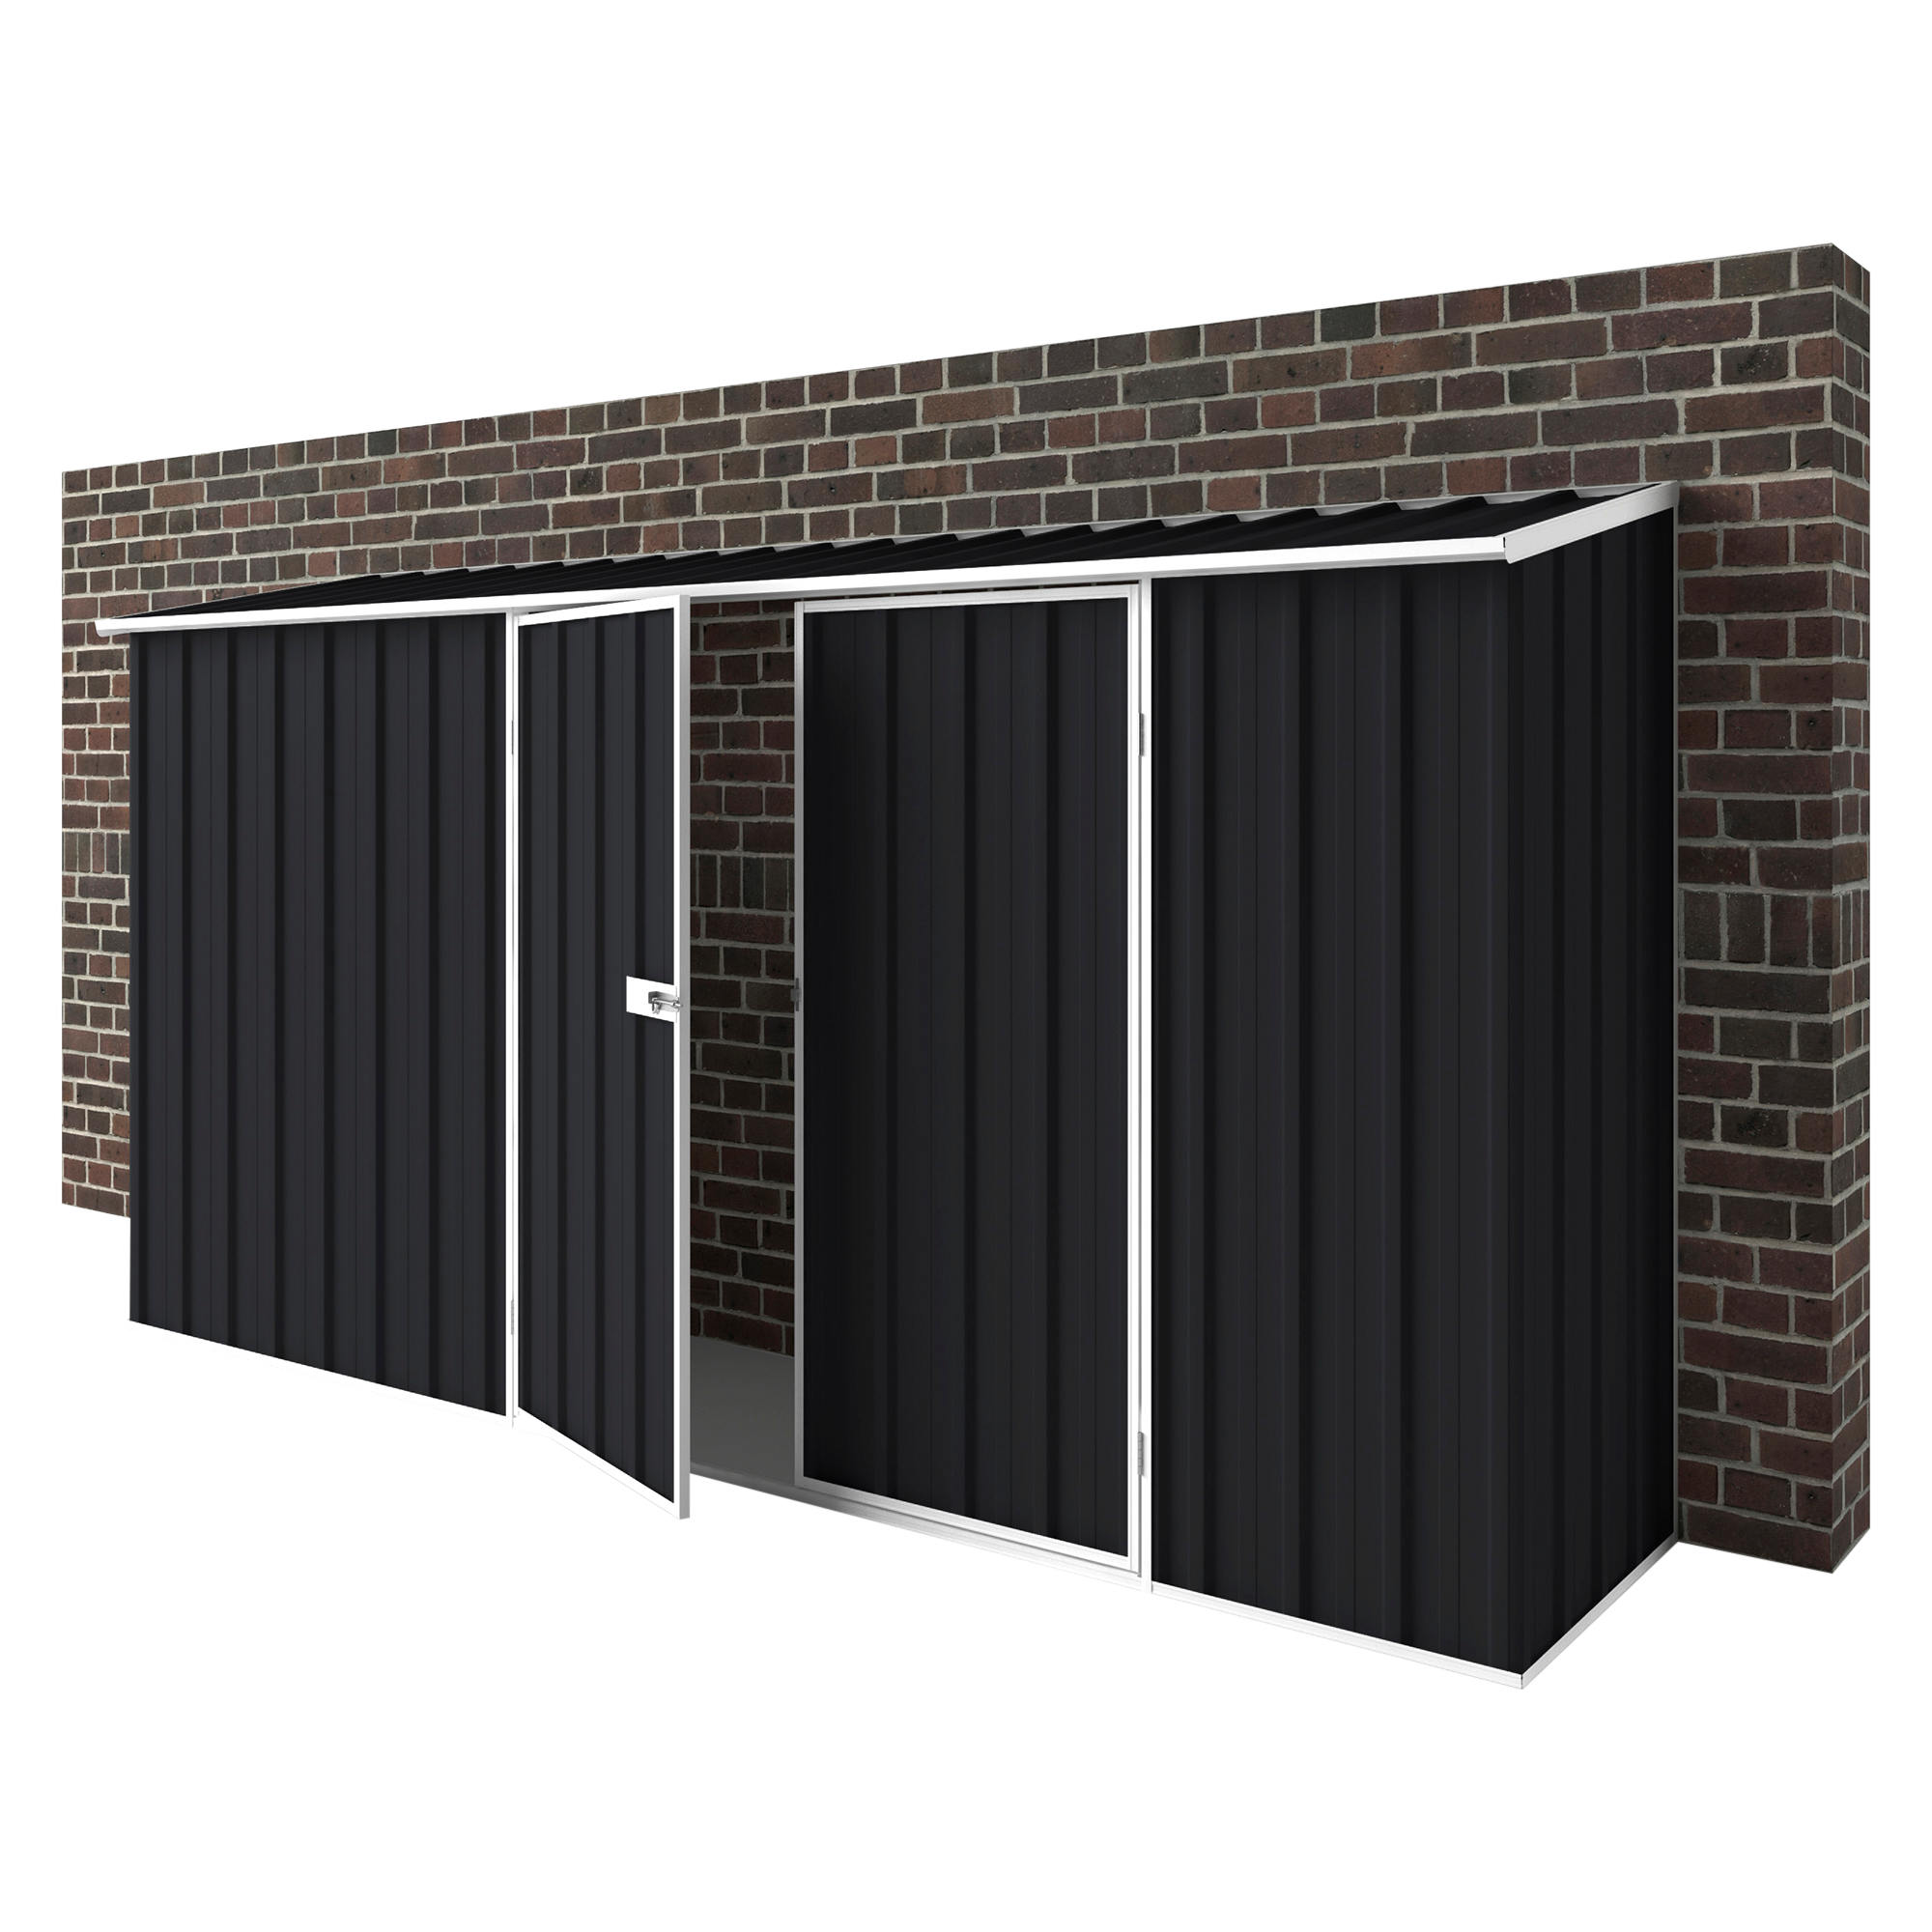 3.75m x 0.78m Off The Wall Garden Shed - EasyShed